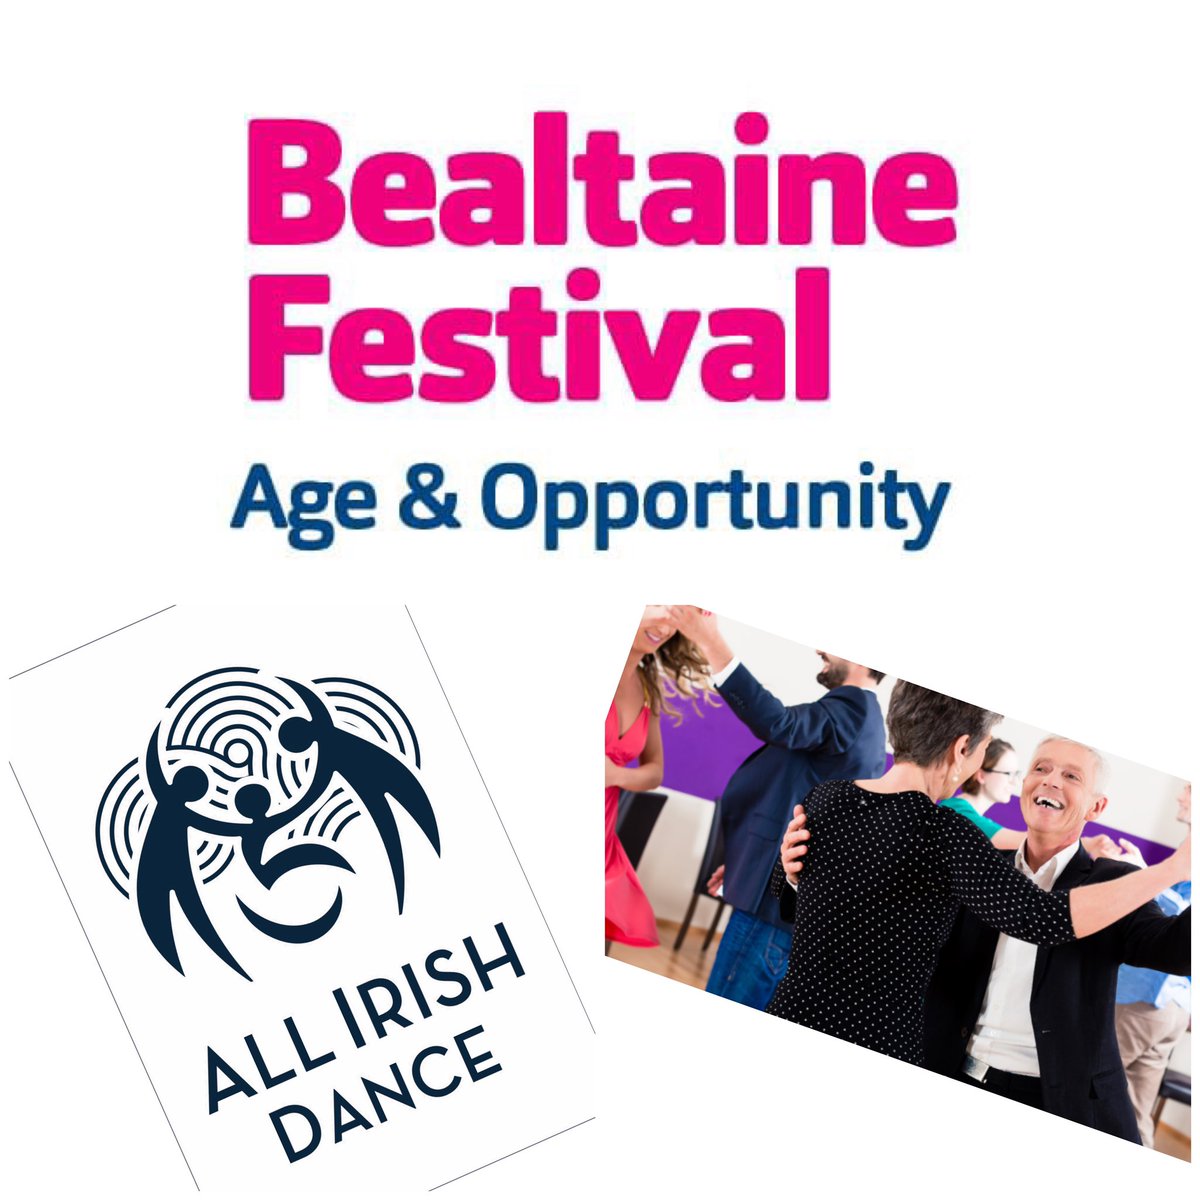 Over 50s inclusive adaptive céilí celebrating @Age_Opp #BealtaineFestival … with cake! Monday 13th May 2024 Mungret St Paul’s GAA #Limerick 11am to 12.30pm €7 per person No partner or experience needed! A dementia friendly & wheelchair user inclusive event.